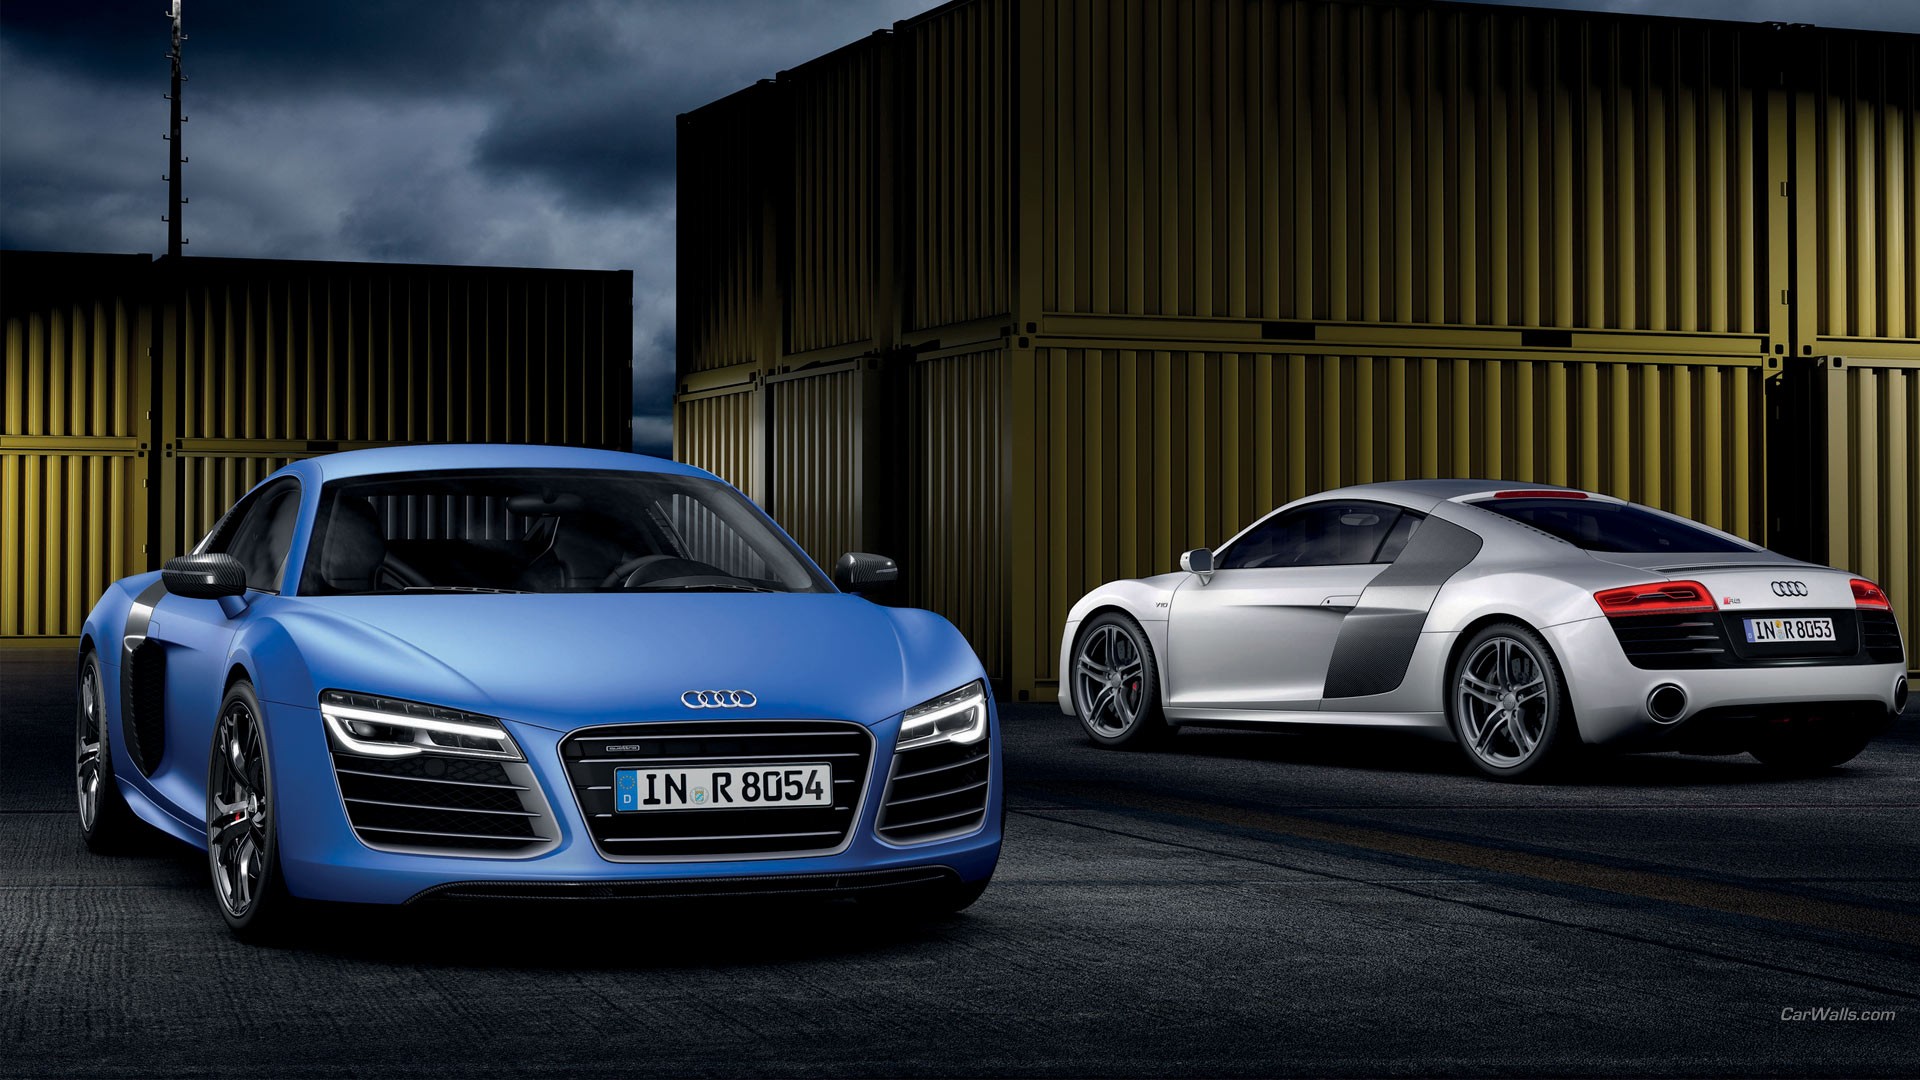 General 1920x1080 Audi R8 silver cars blue cars car vehicle Audi frontal view numbers